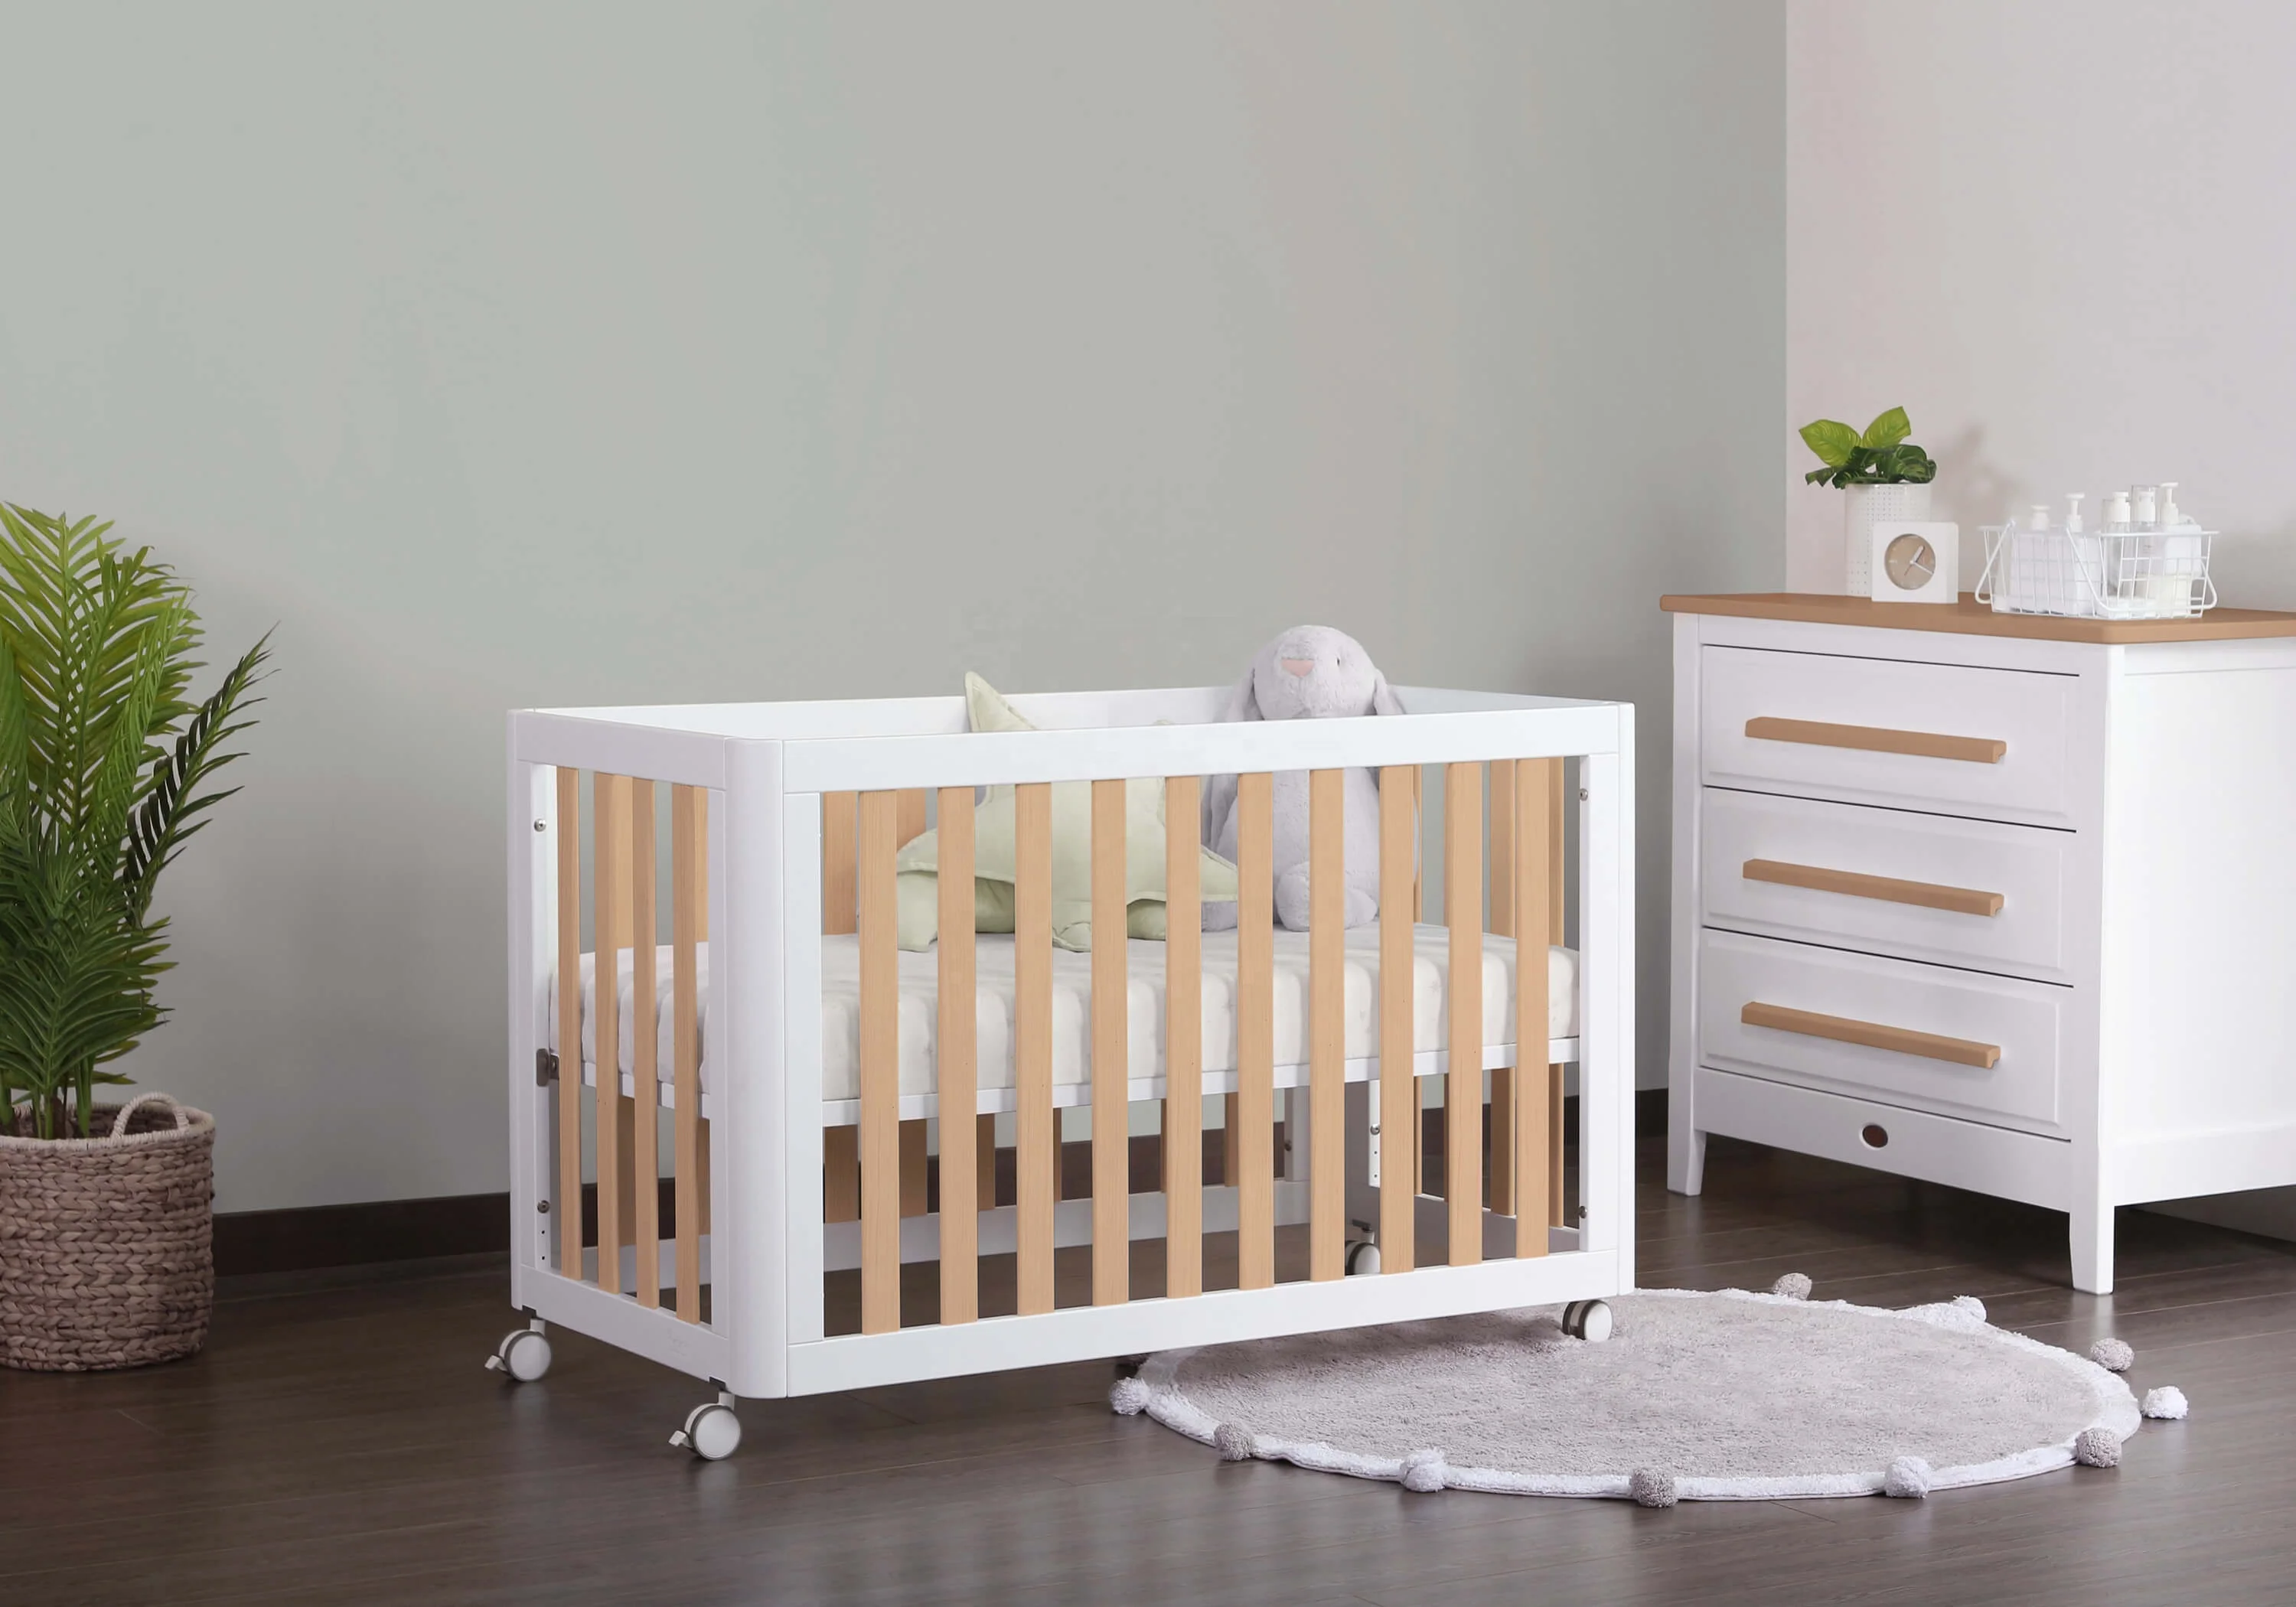 22NVCB048 High Quality 4 In Convertible Crib New Born Baby Sleeping Bed Lit Bebe Wooden Babies Multifunction Crib Bed